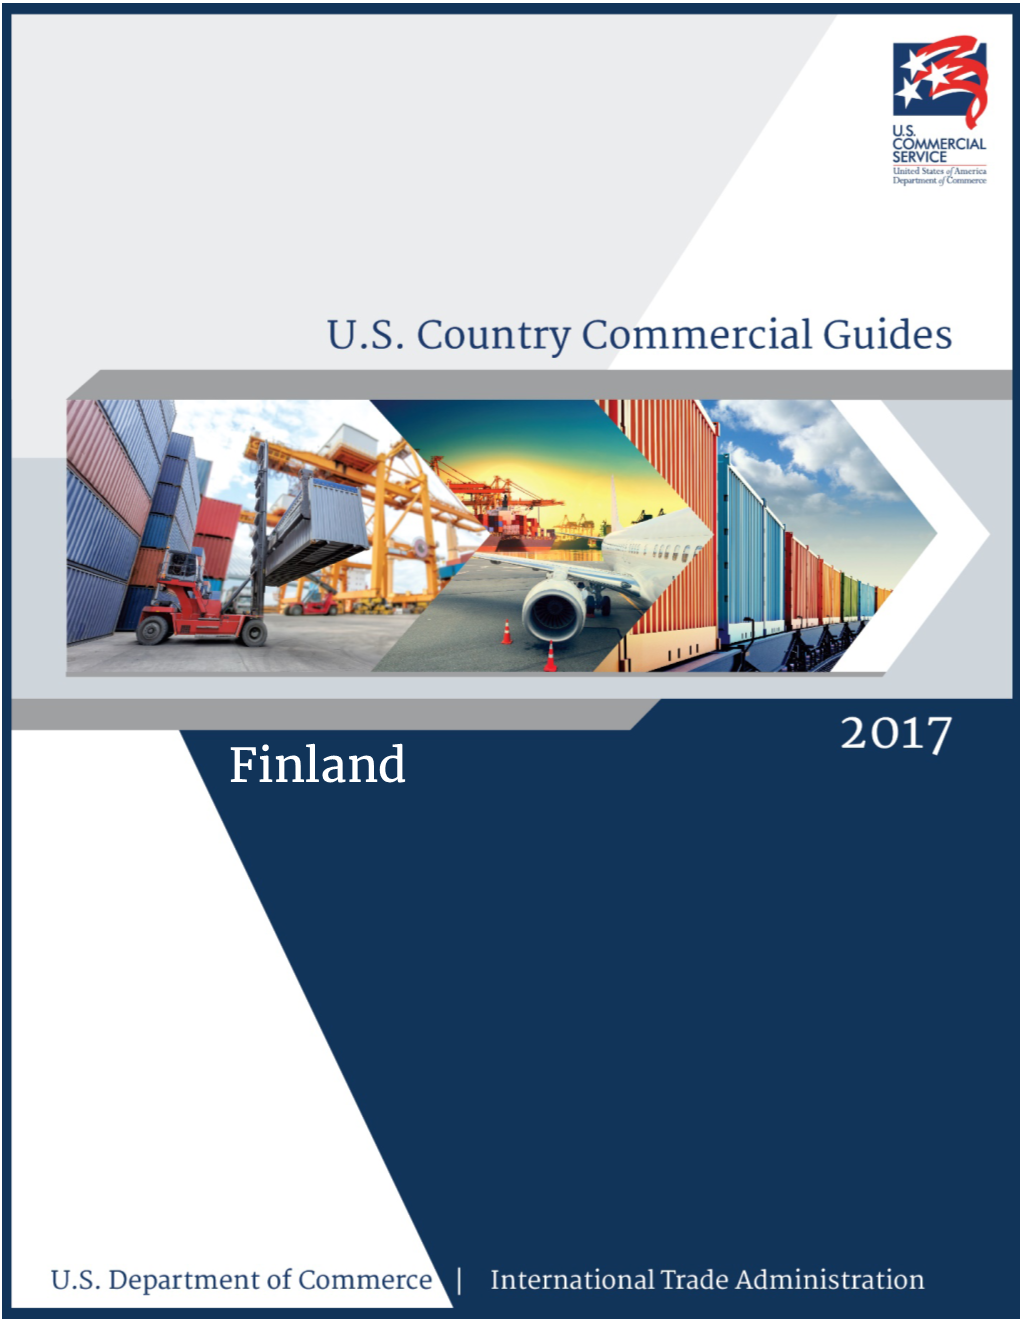 Finland Commercial Guide